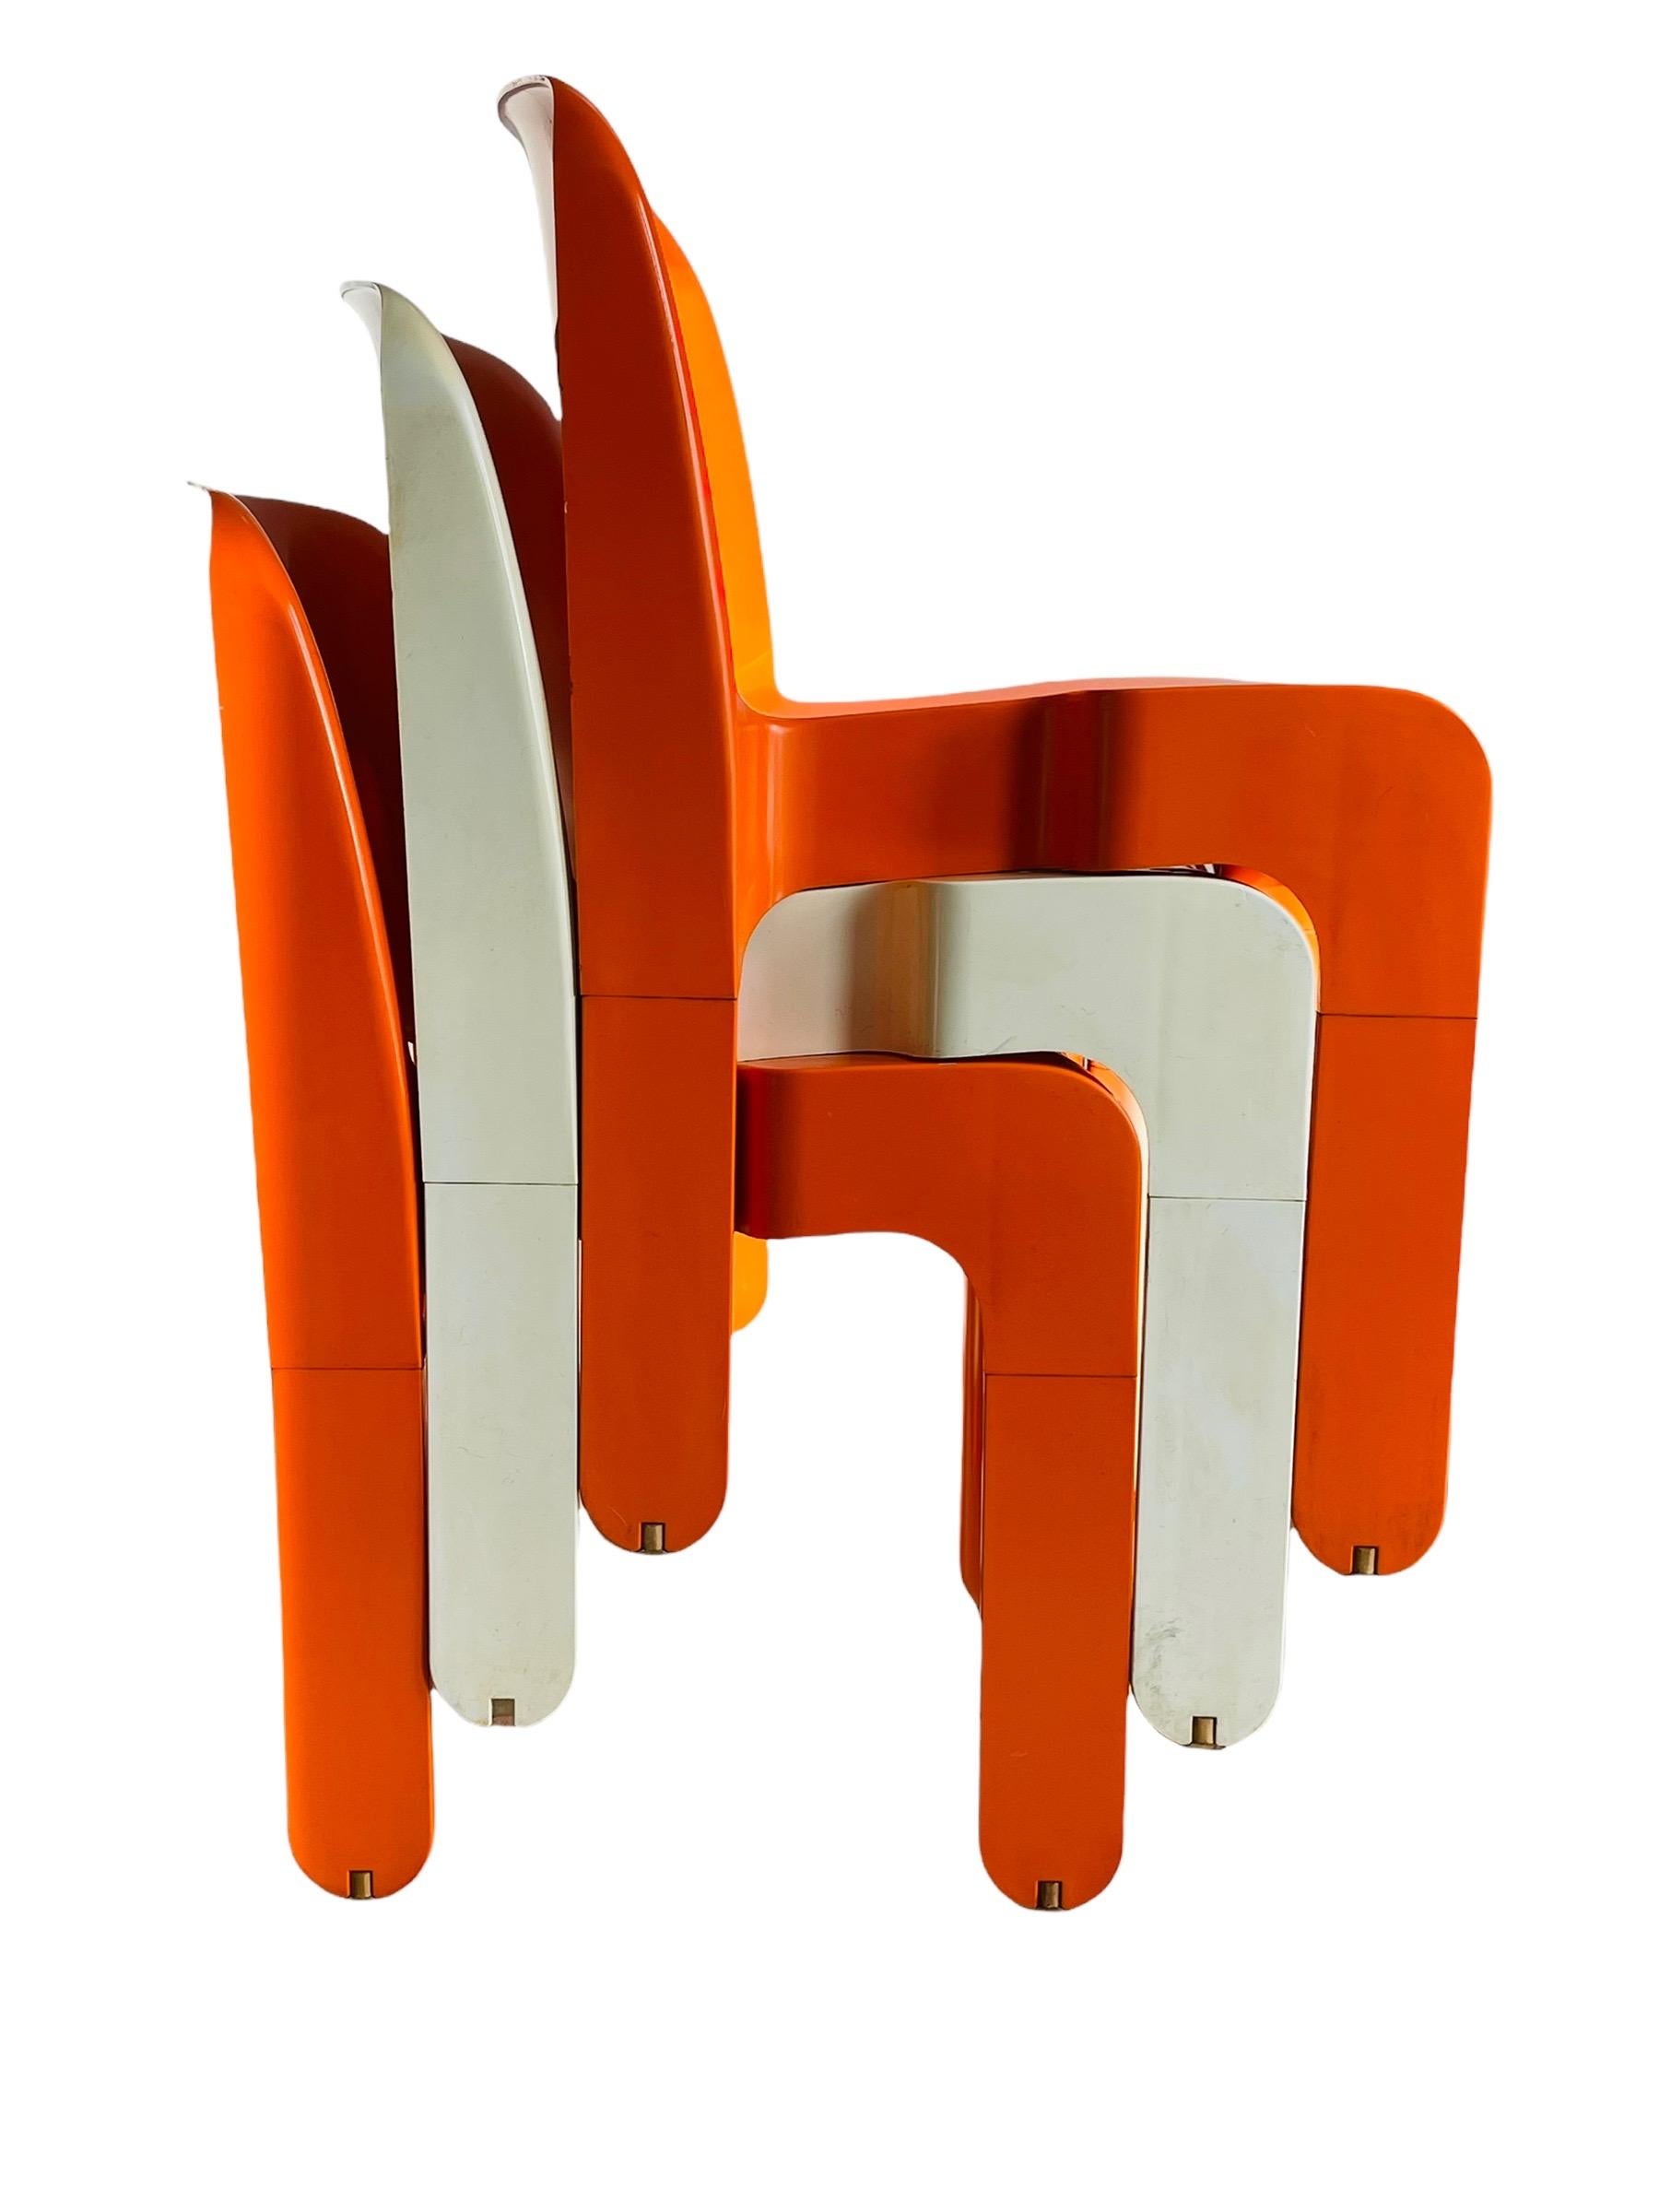 Set 3 Space Age Stacking Chairs by Joe Colombo 1967 Italy In Good Condition For Sale In Brooklyn, NY